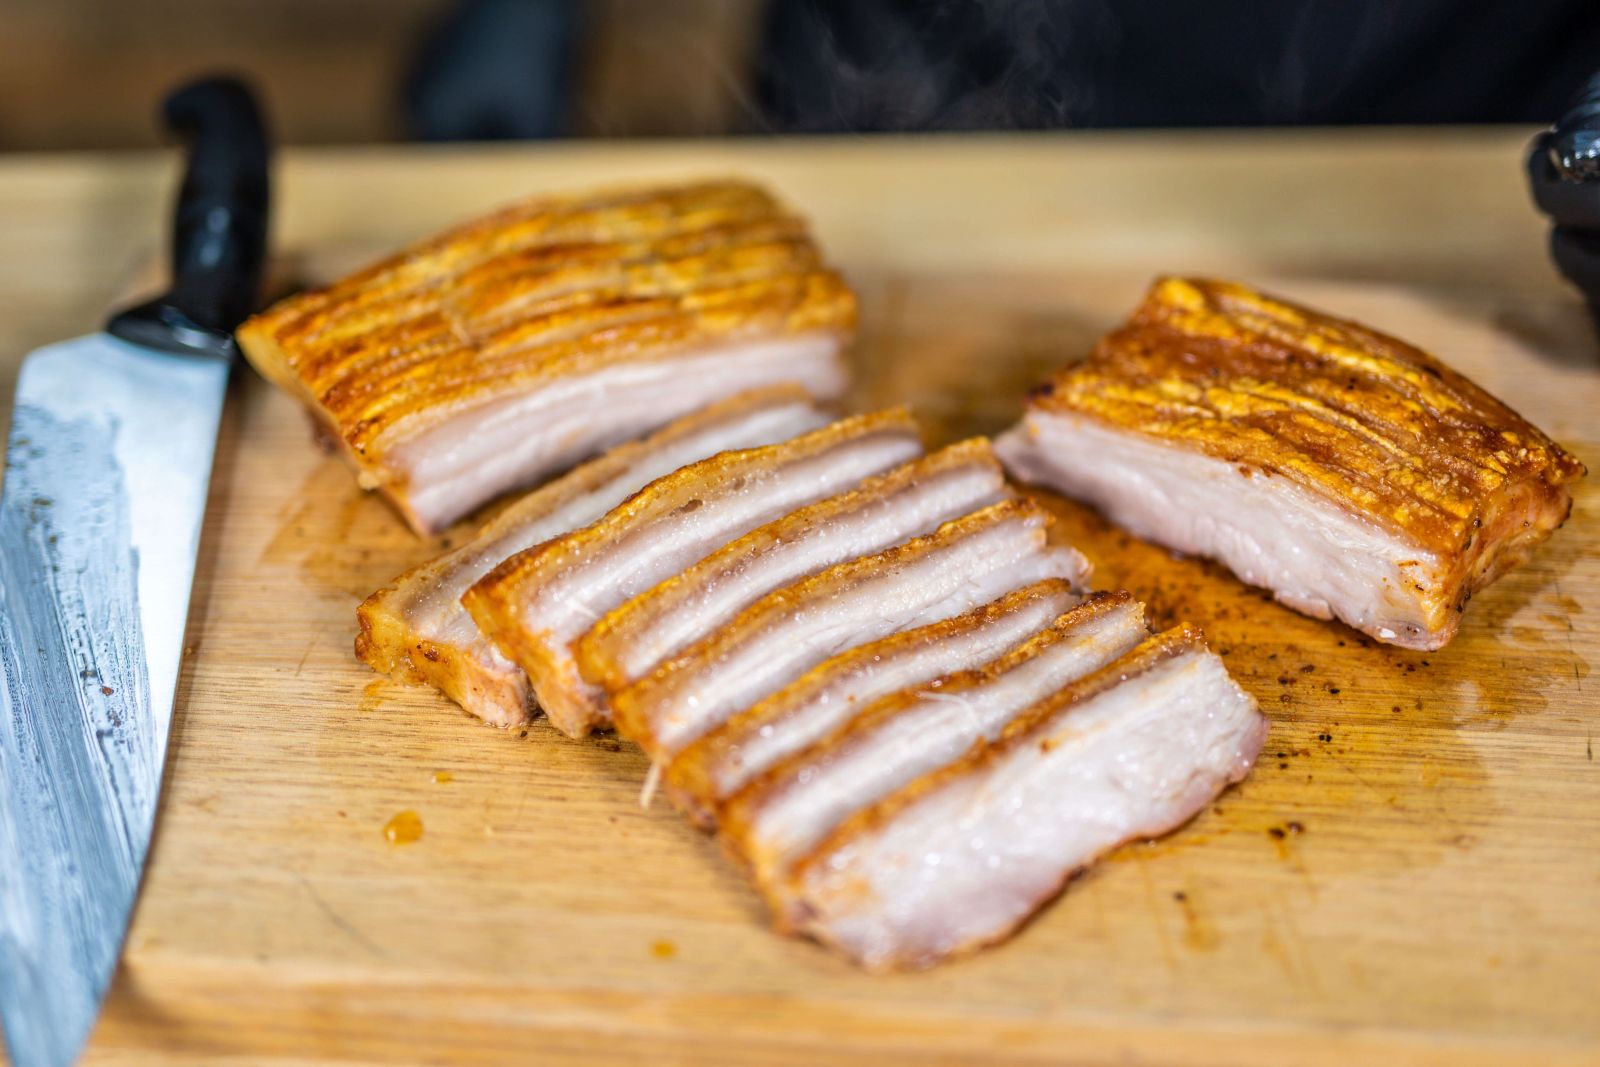 This photo shows a Sliced Roast Pork Belly